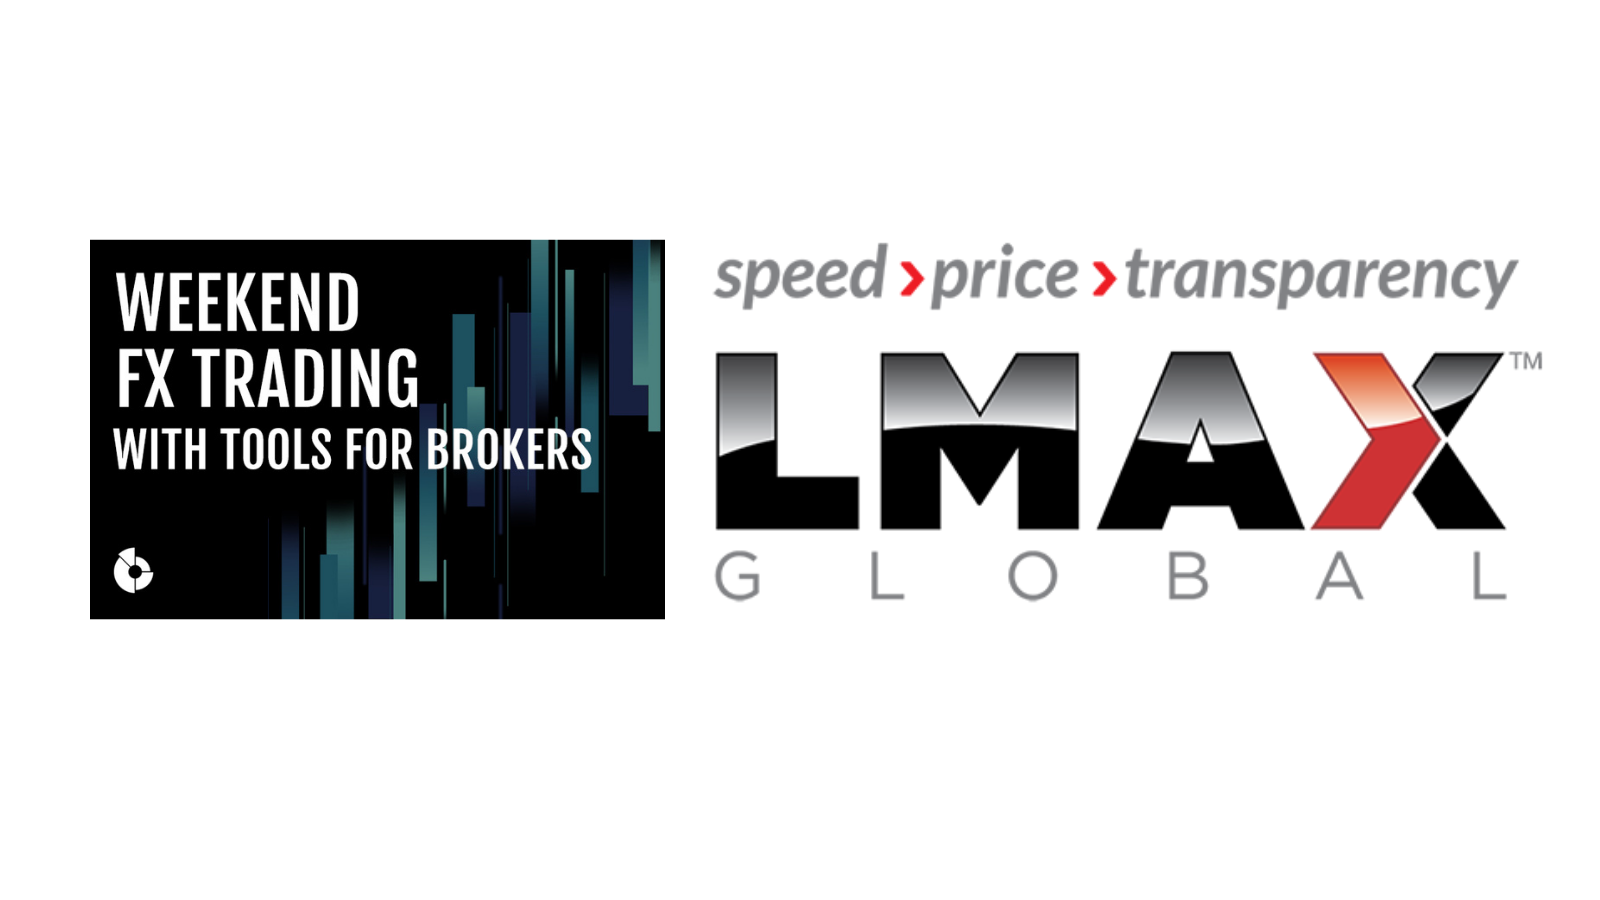 Tools For Brokers Facilitates Weekend Trading With LMAX